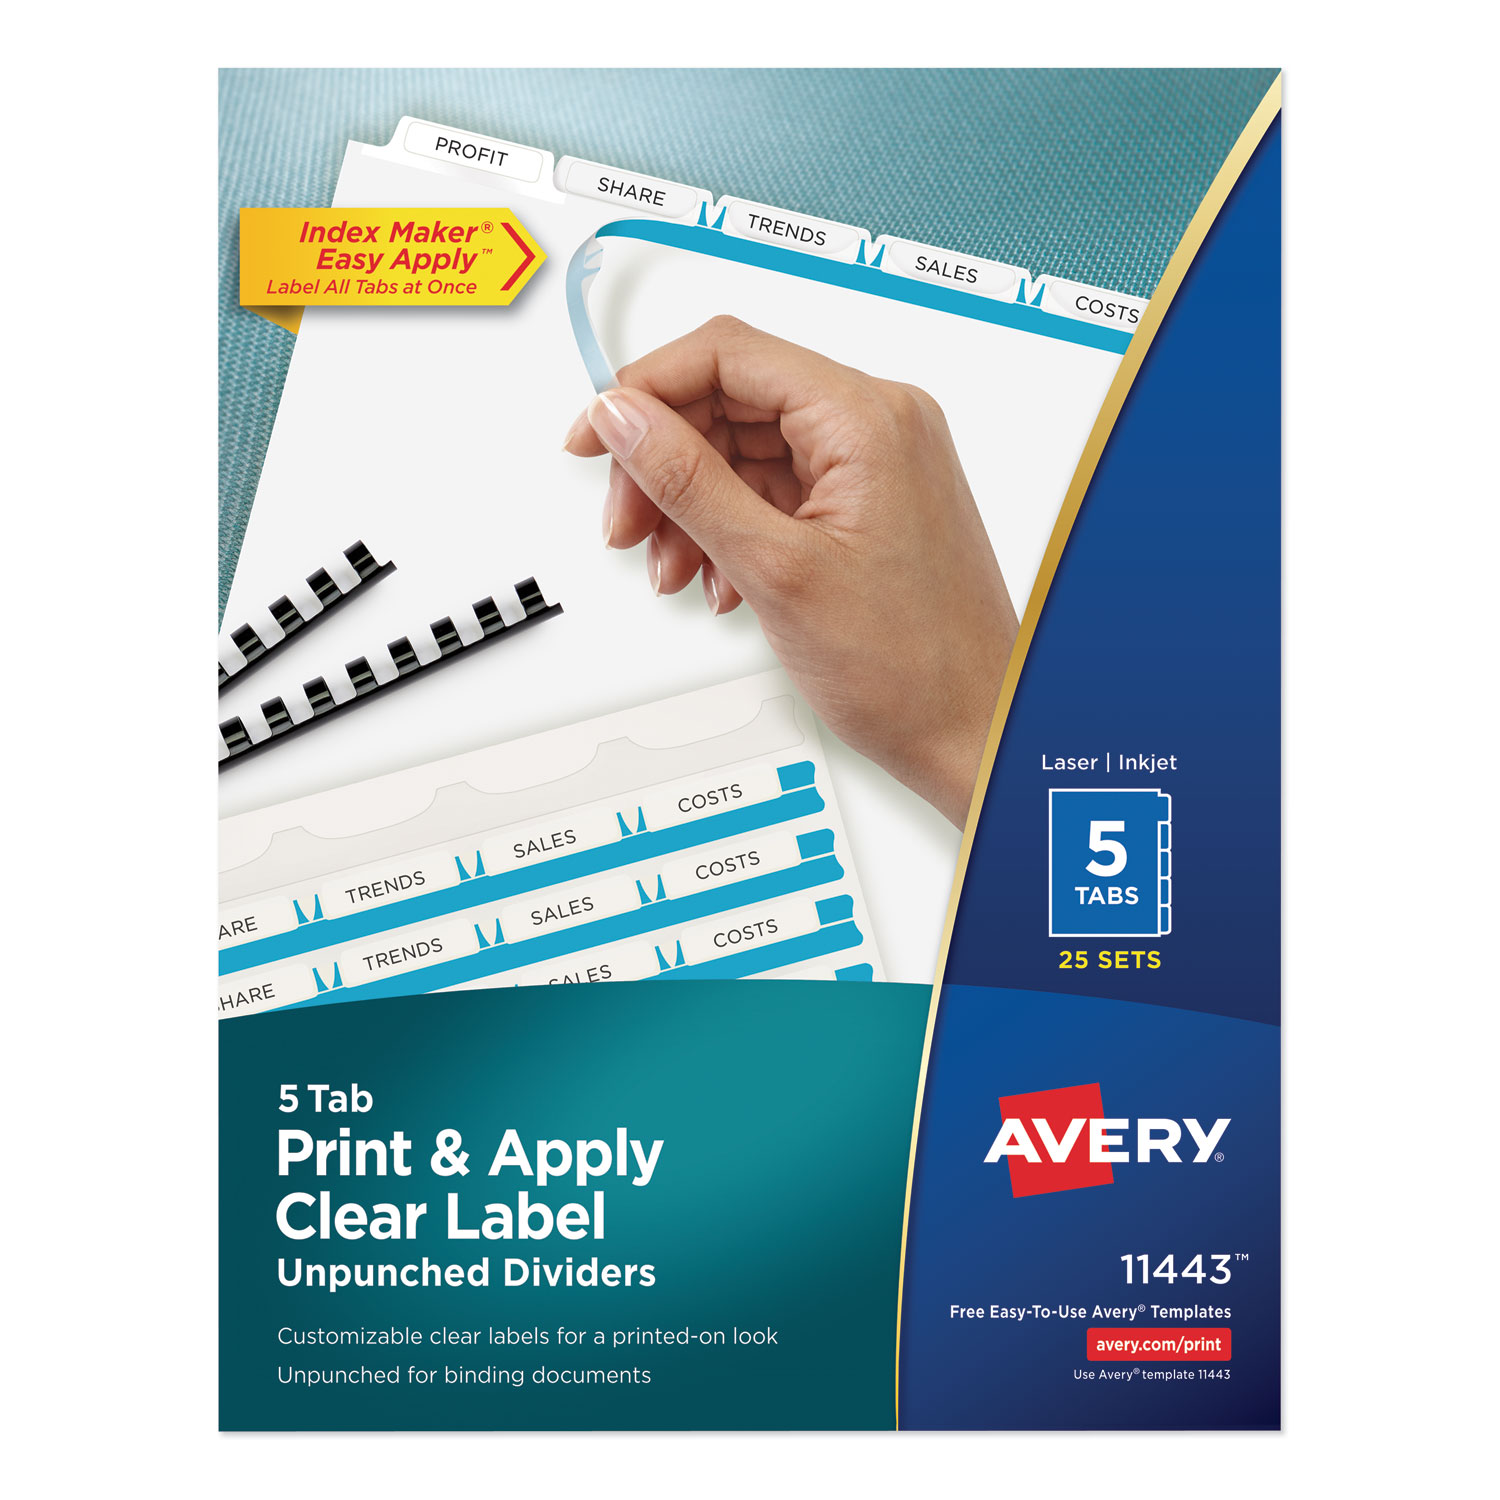  Avery 11443 Print and Apply Index Maker Clear Label Unpunched Dividers, 5-Tab, Ltr, 25 Sets (AVE11443) 